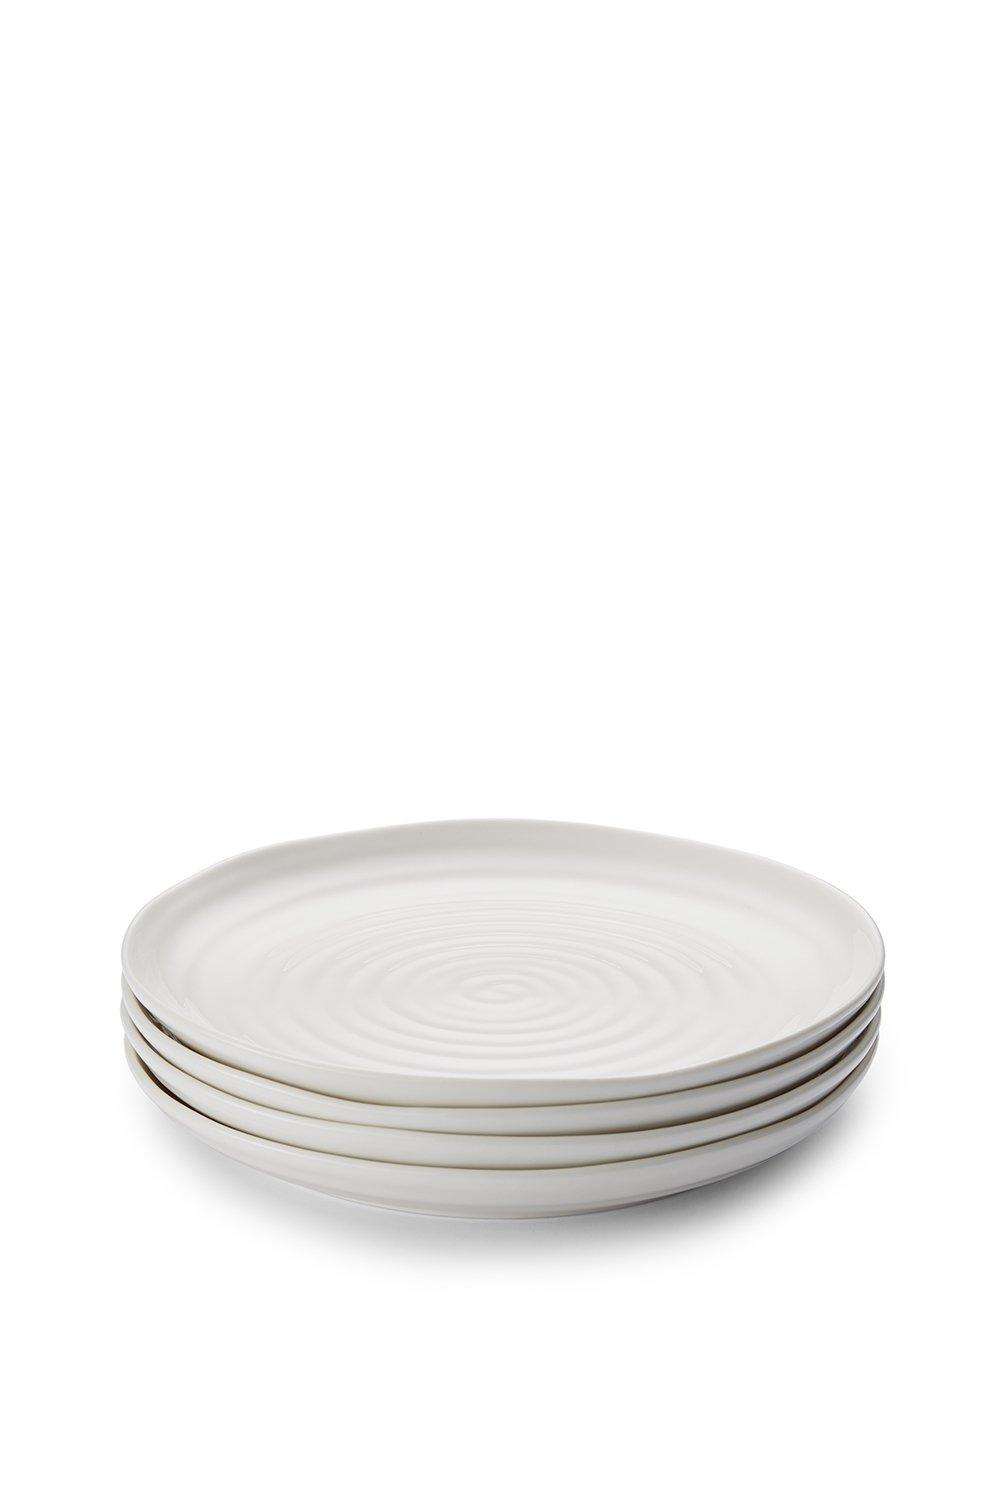 'Sophie Conran' Set of 4 Round 22cm Coupe Buffet Plates